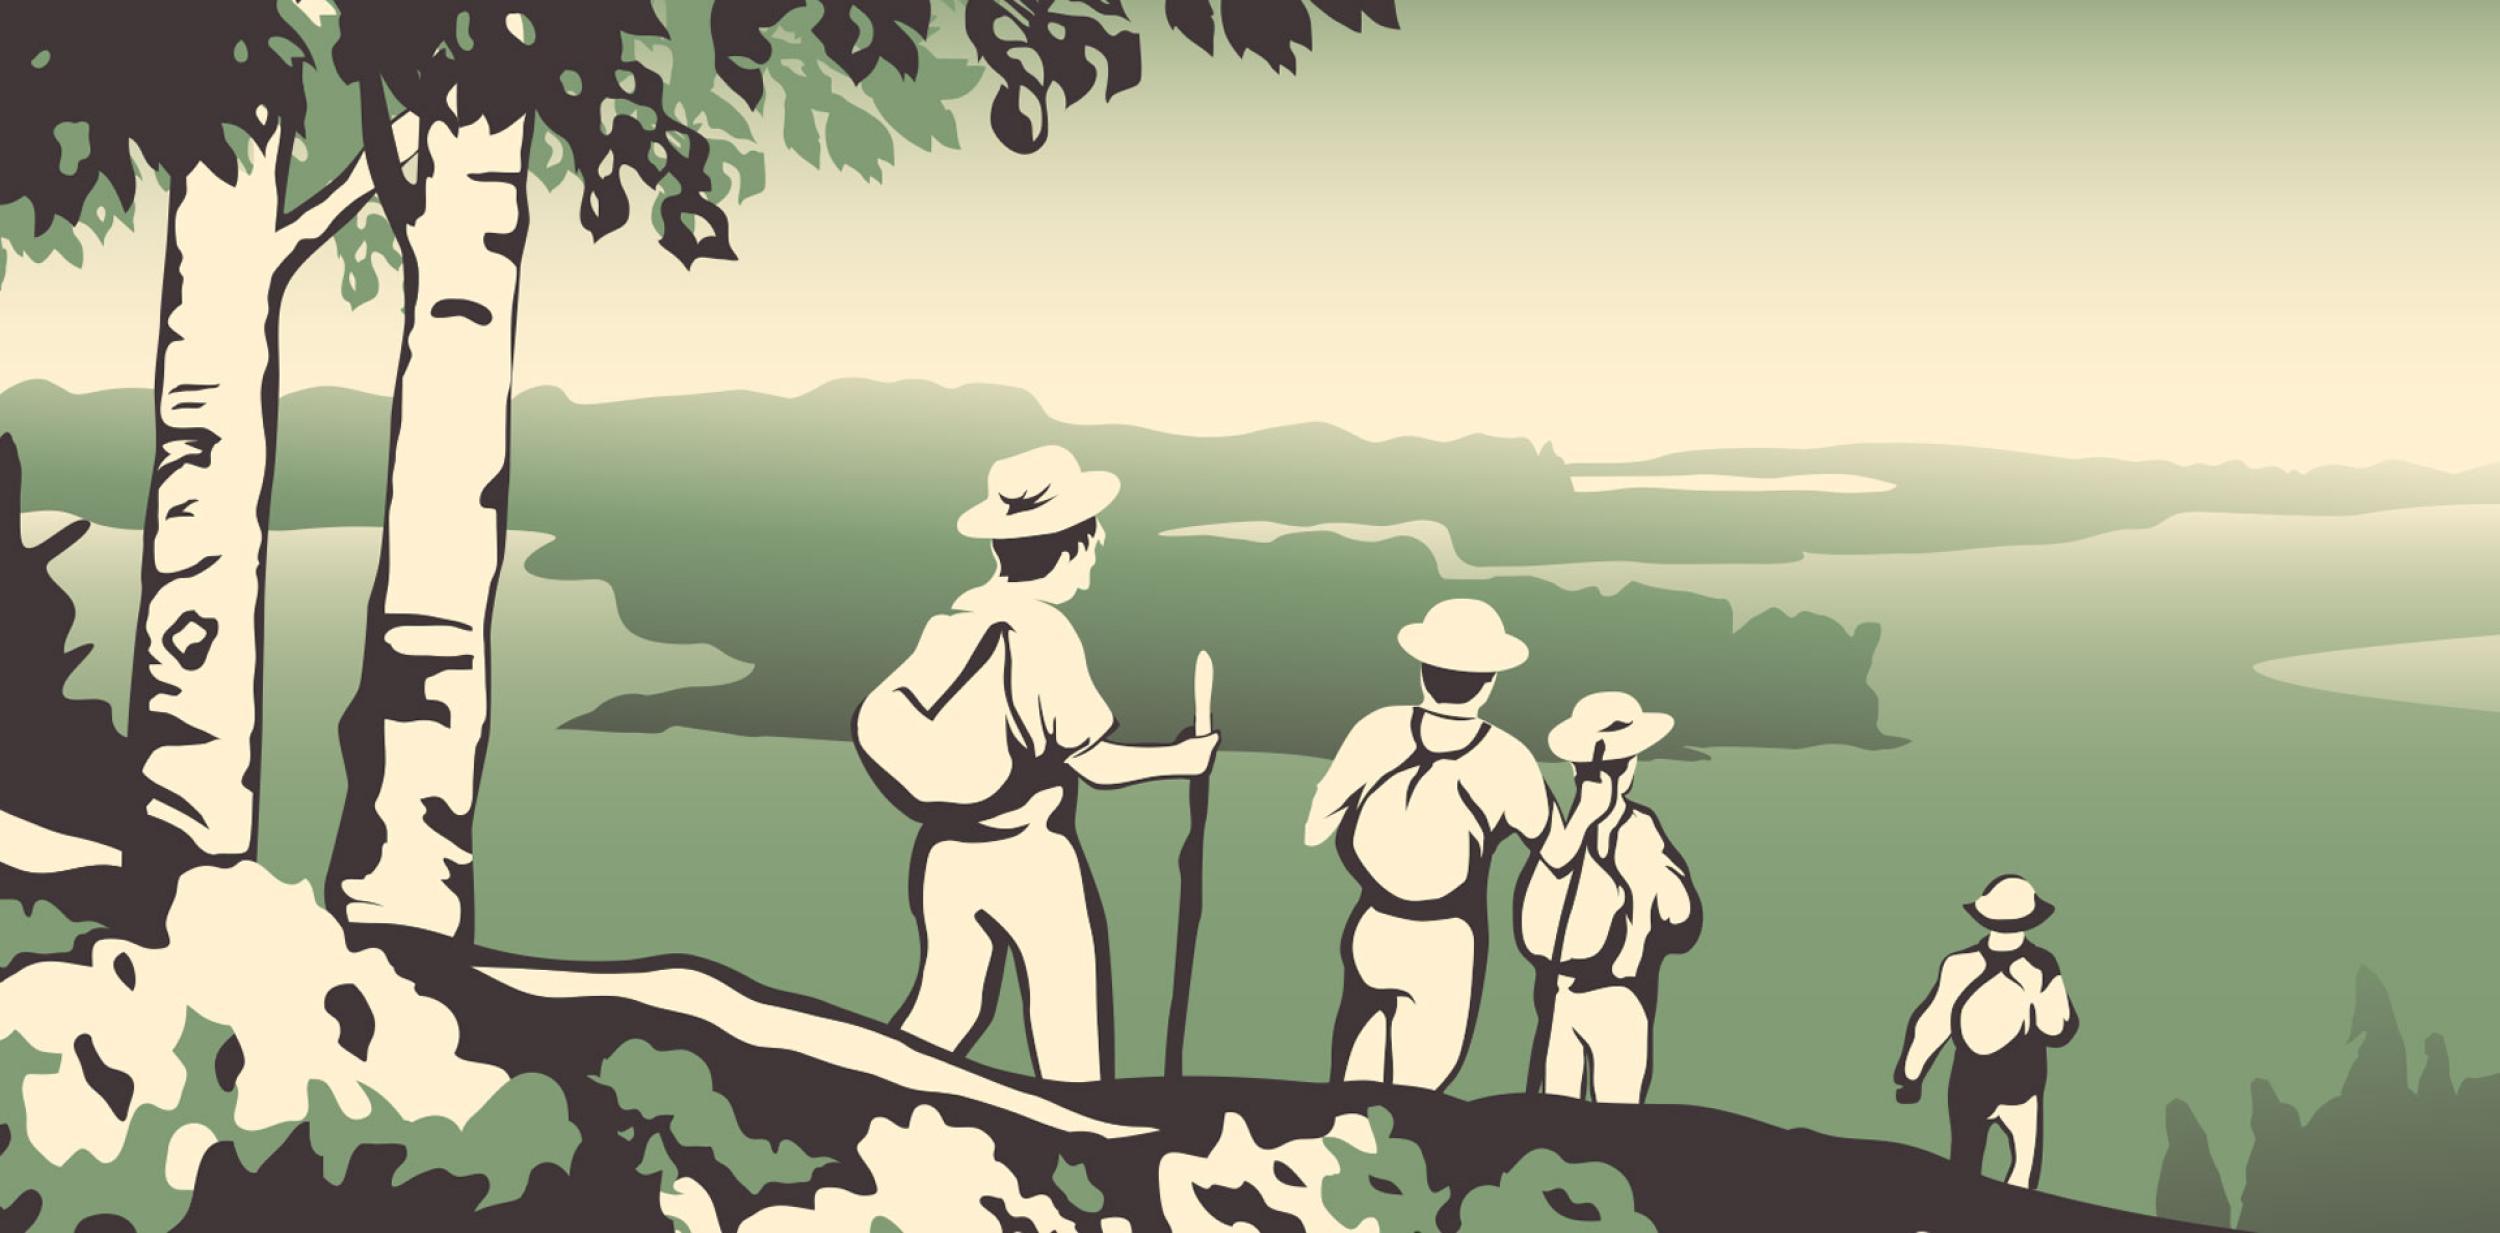 Illustration of people on a rural hike